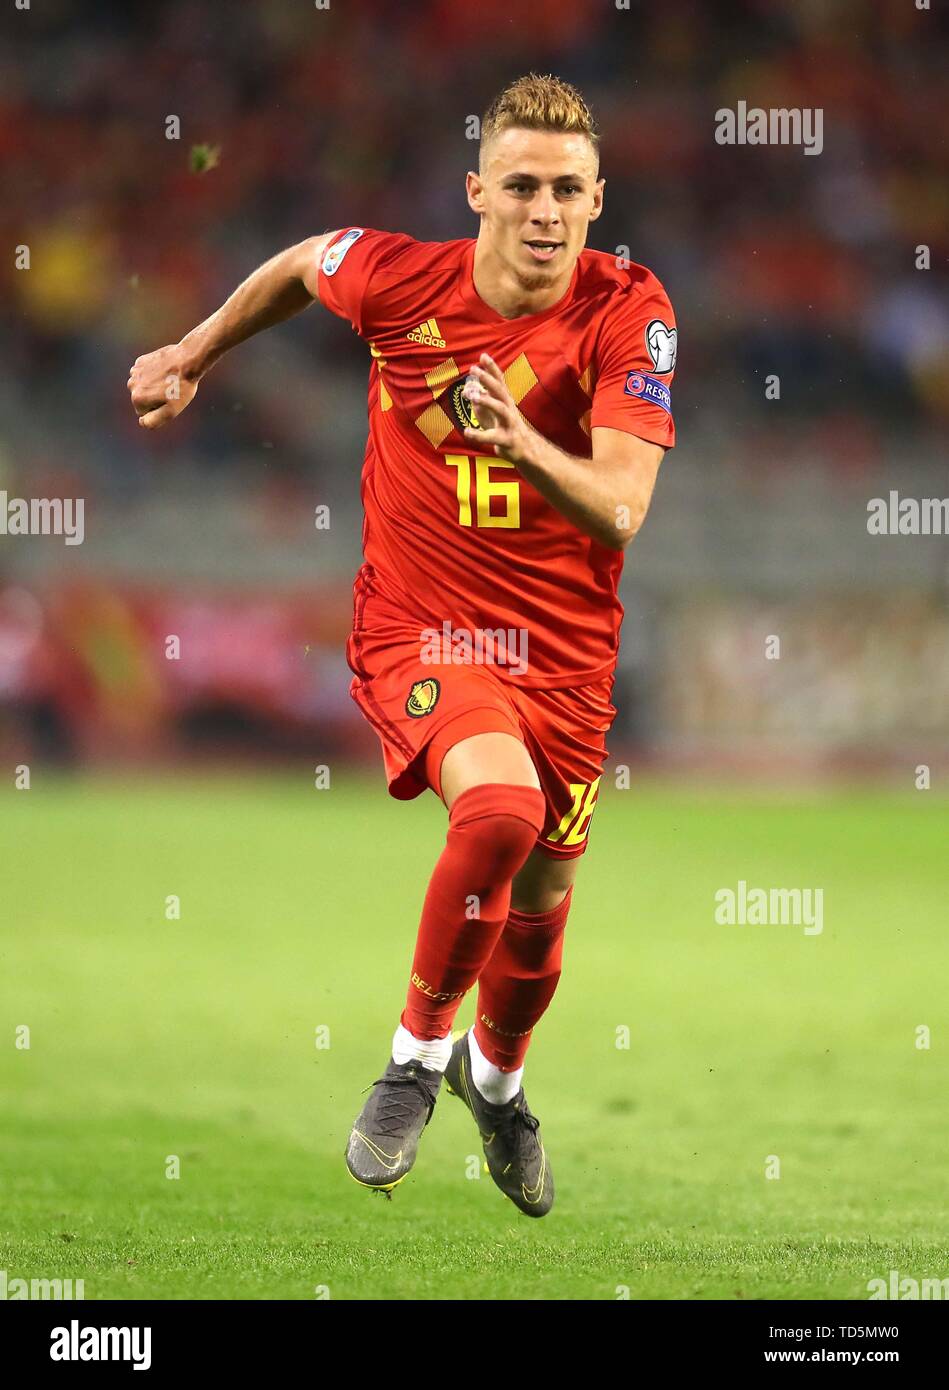 Belgium's Thorgan Hazard in action during the UEFA Euro 2020 Qualifying, Group I match at the King Baudouin Stadium, Brussels. PRESS ASSOCIATION Photo. Picture date: Tuesday June 11, 2019. See PA story SOCCER Belgium. Photo credit should read: Bradley Collyer/PA Wire. Stock Photo